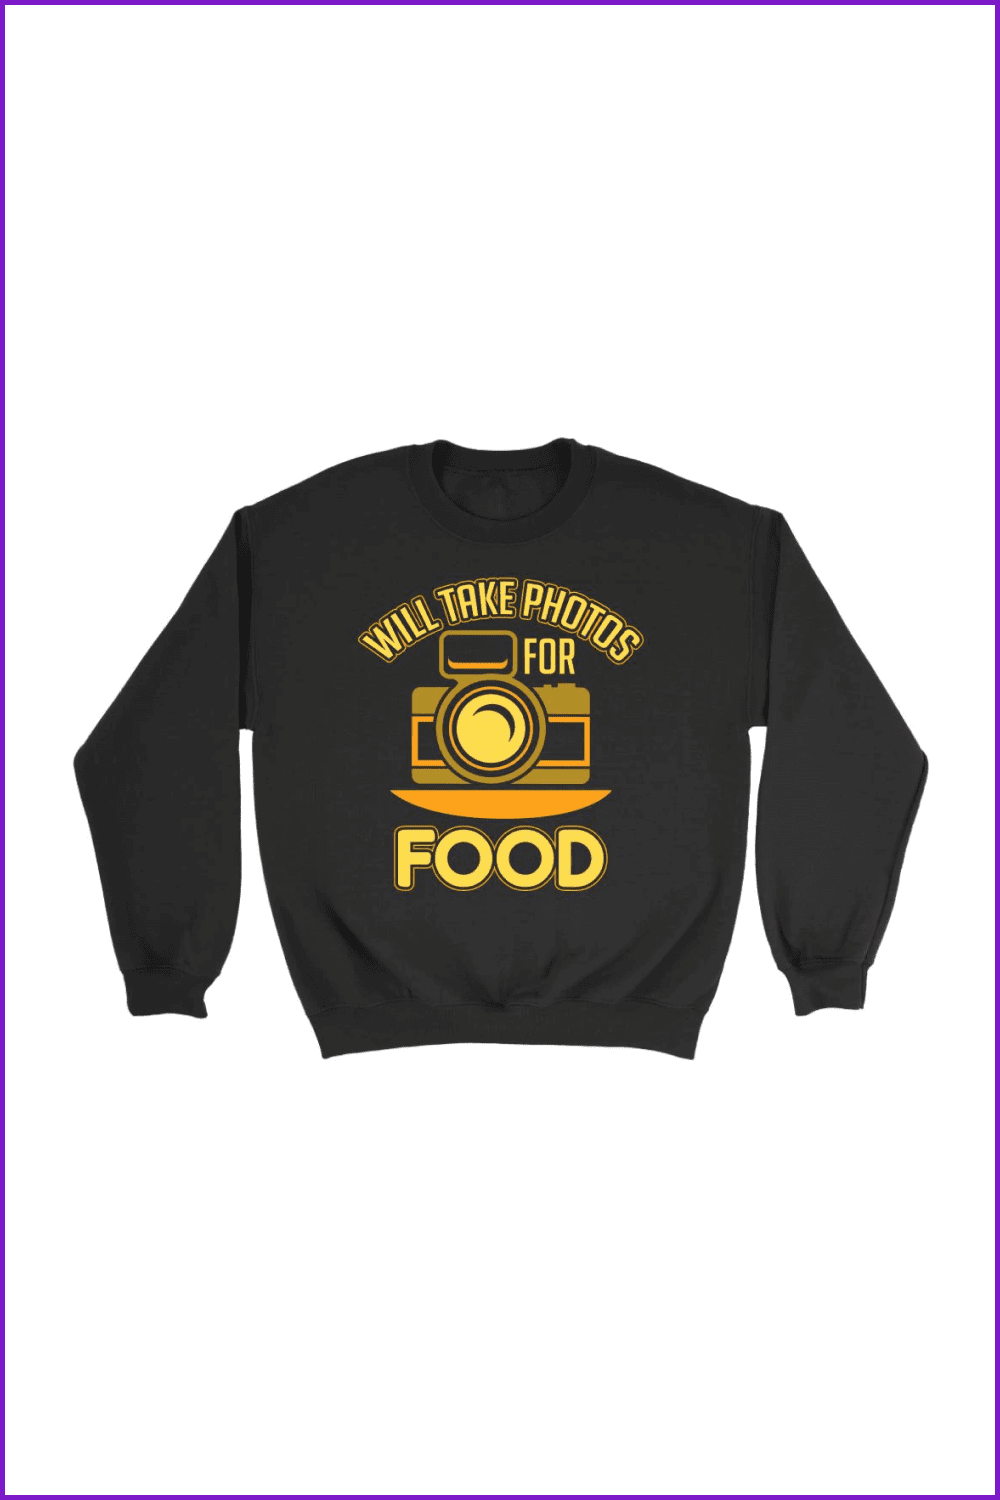 Will Take Photos For Food Sweater.